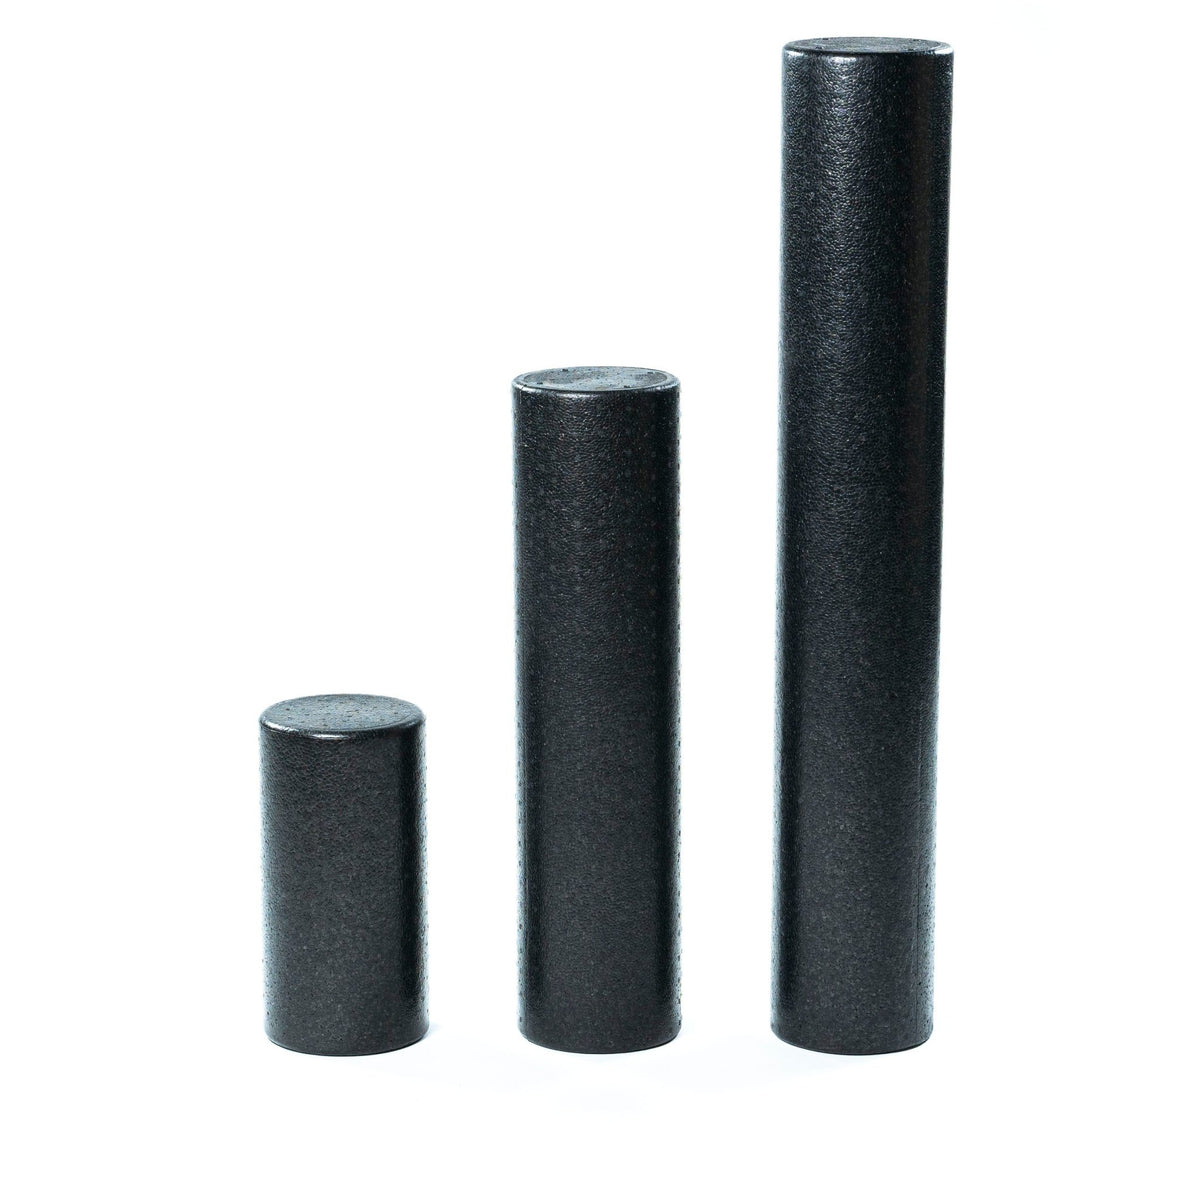 FitWay Equip. Foam Roller 60cm - Fitness Experience